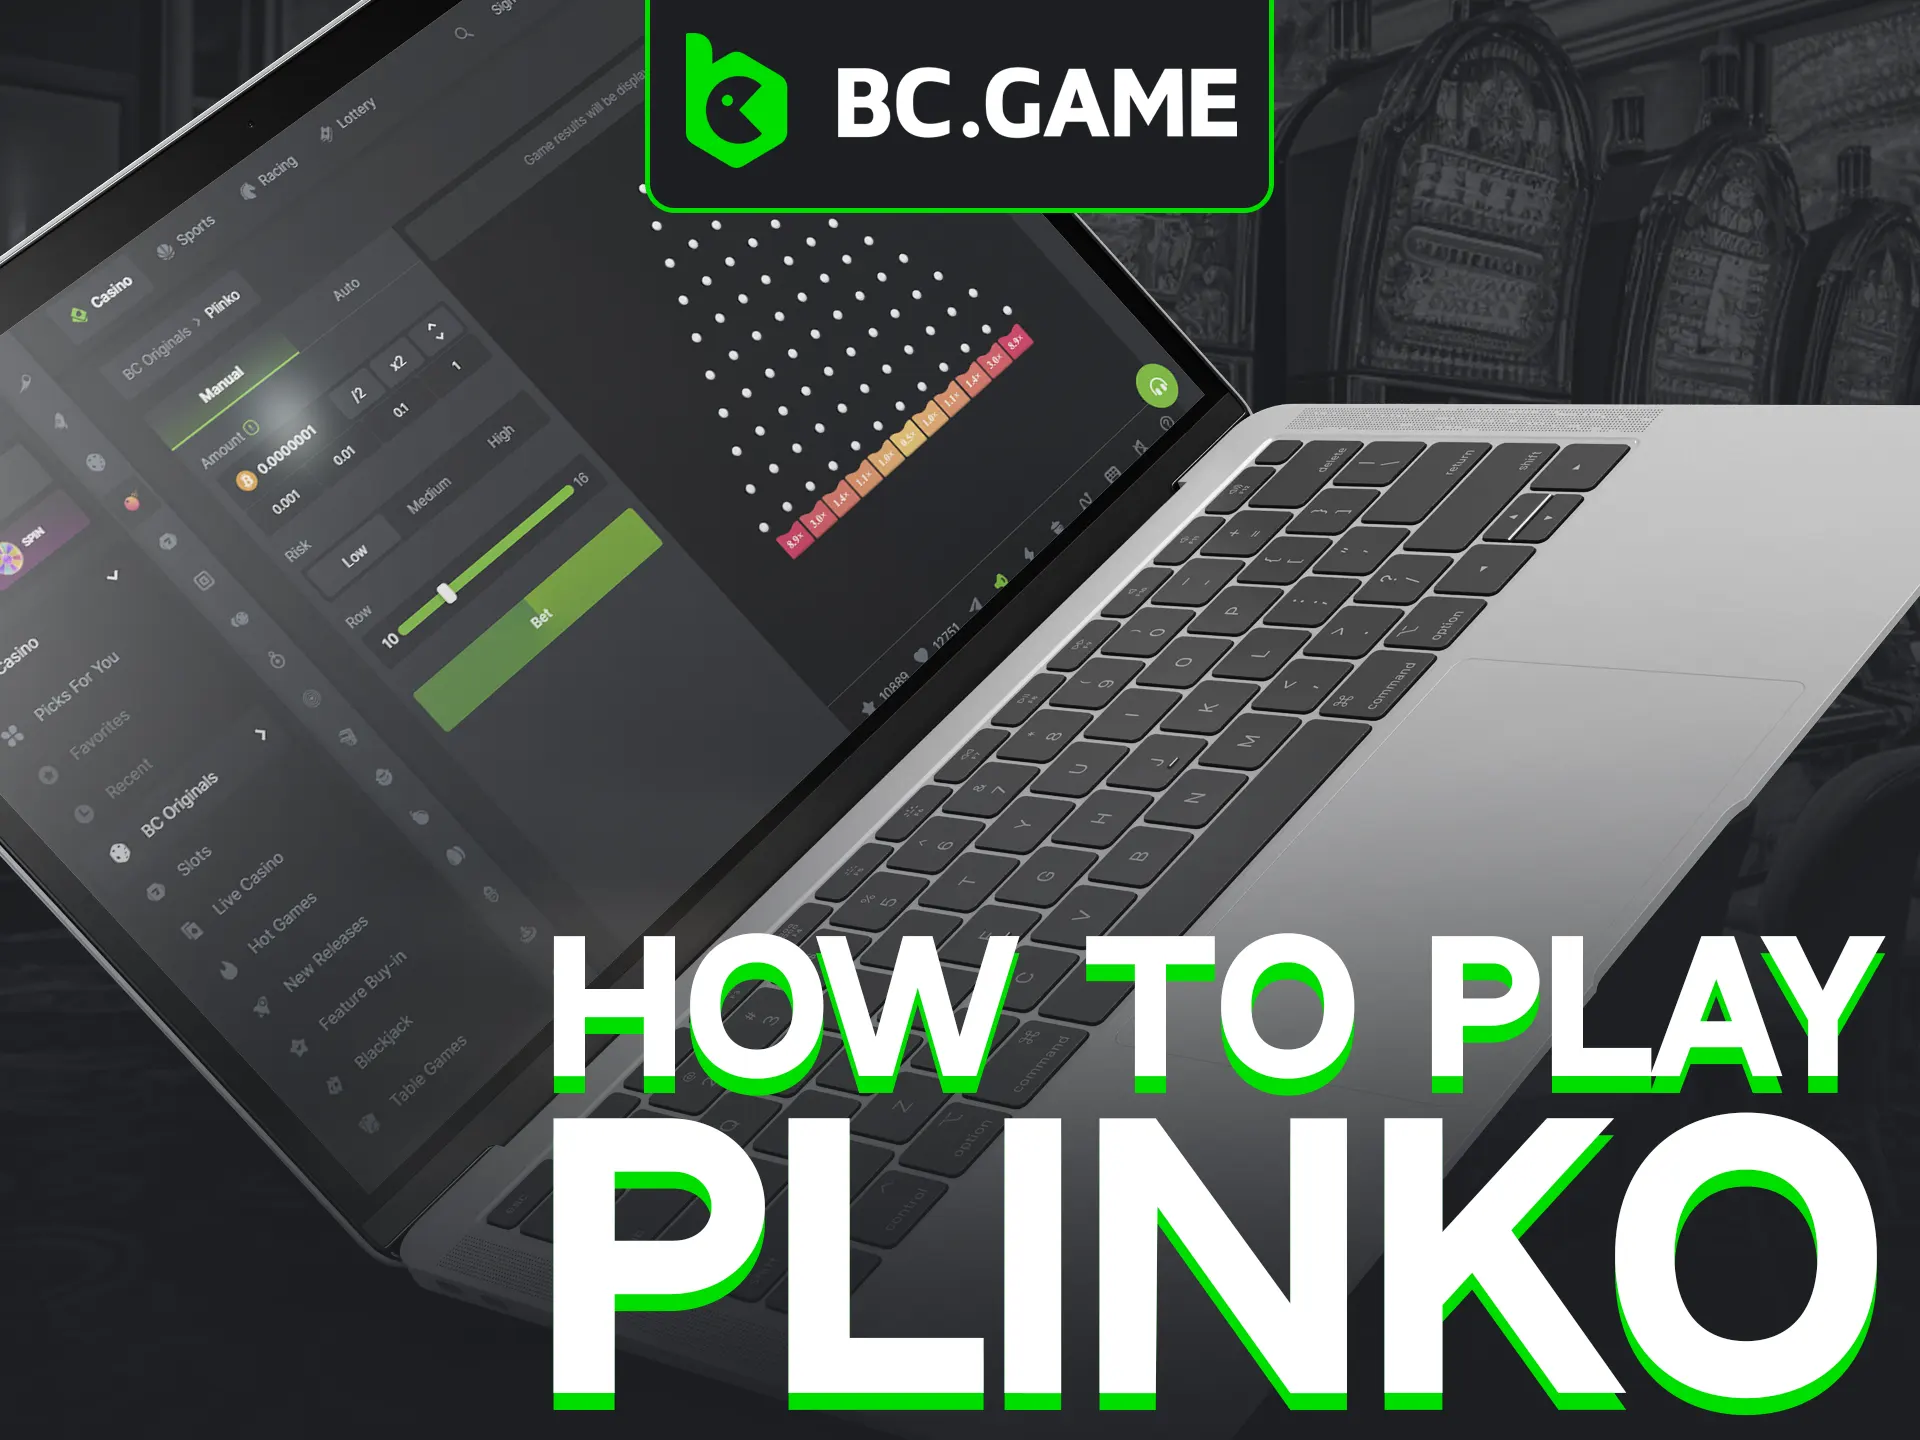 Play BC Game's Plinko with customizable options.